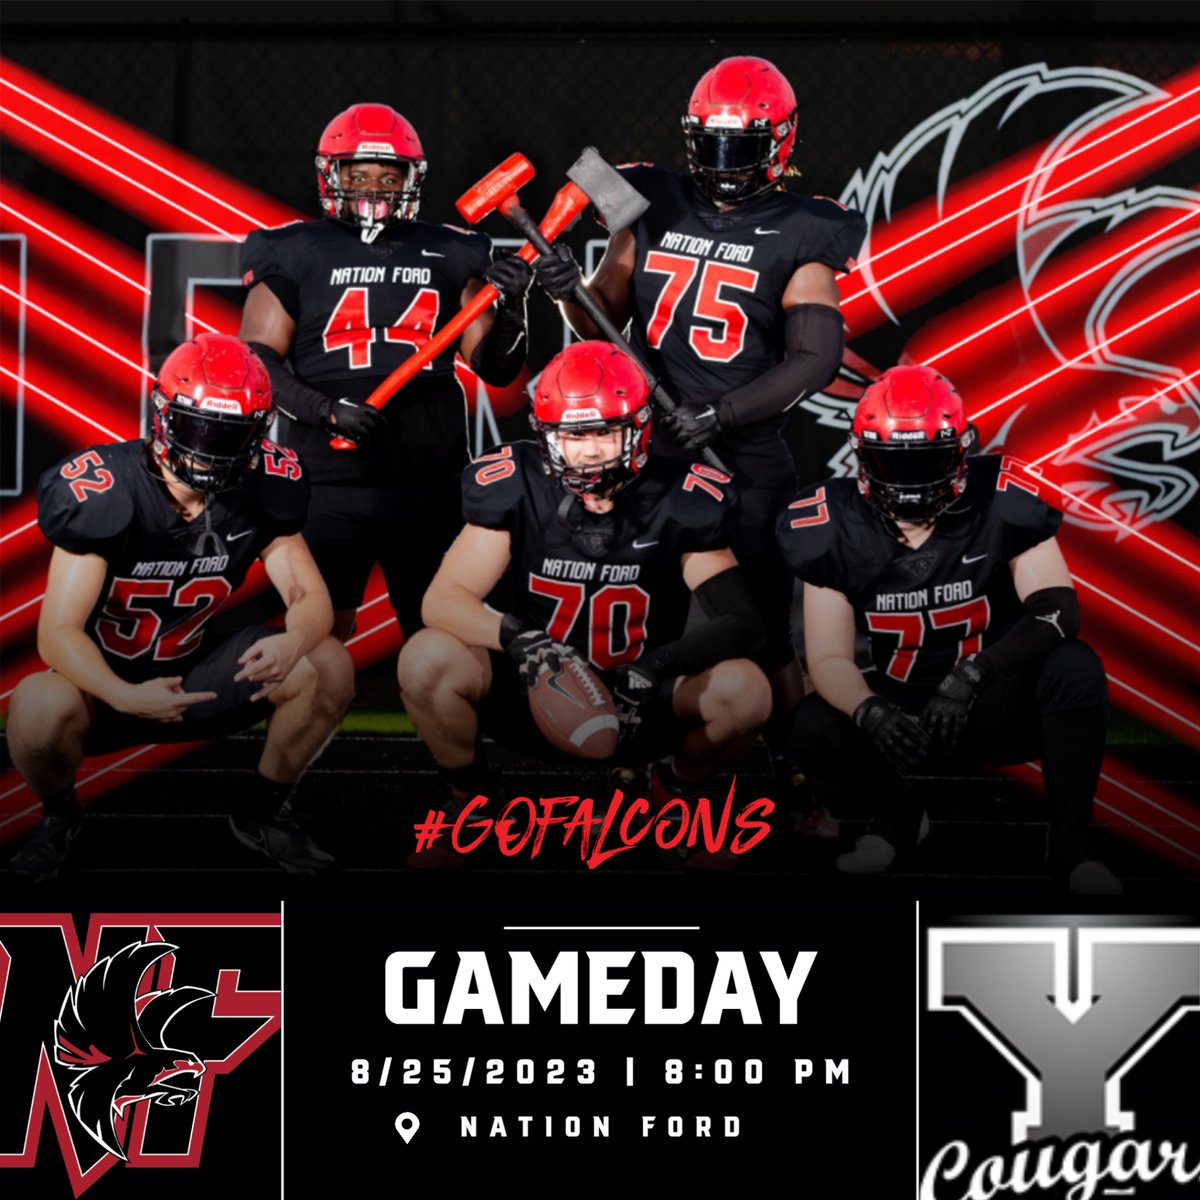 IT’S GAME DAY in Falcon Territory. Let’s go Falcons beat York! #gofalcons #nafo #beatyork #onenation